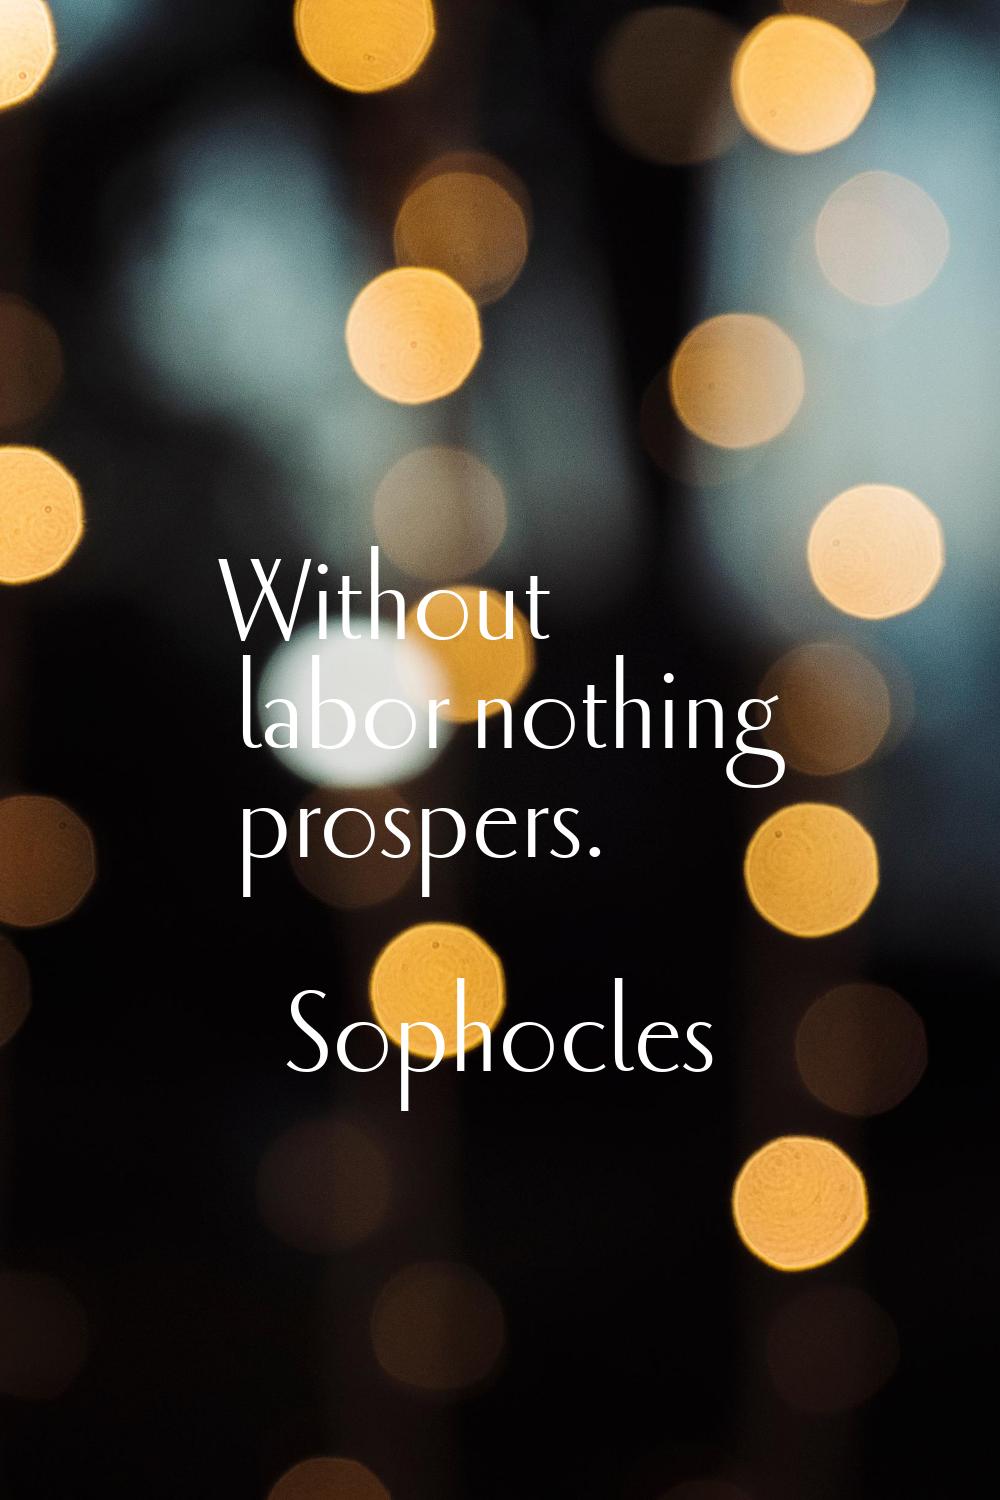 Without labor nothing prospers.